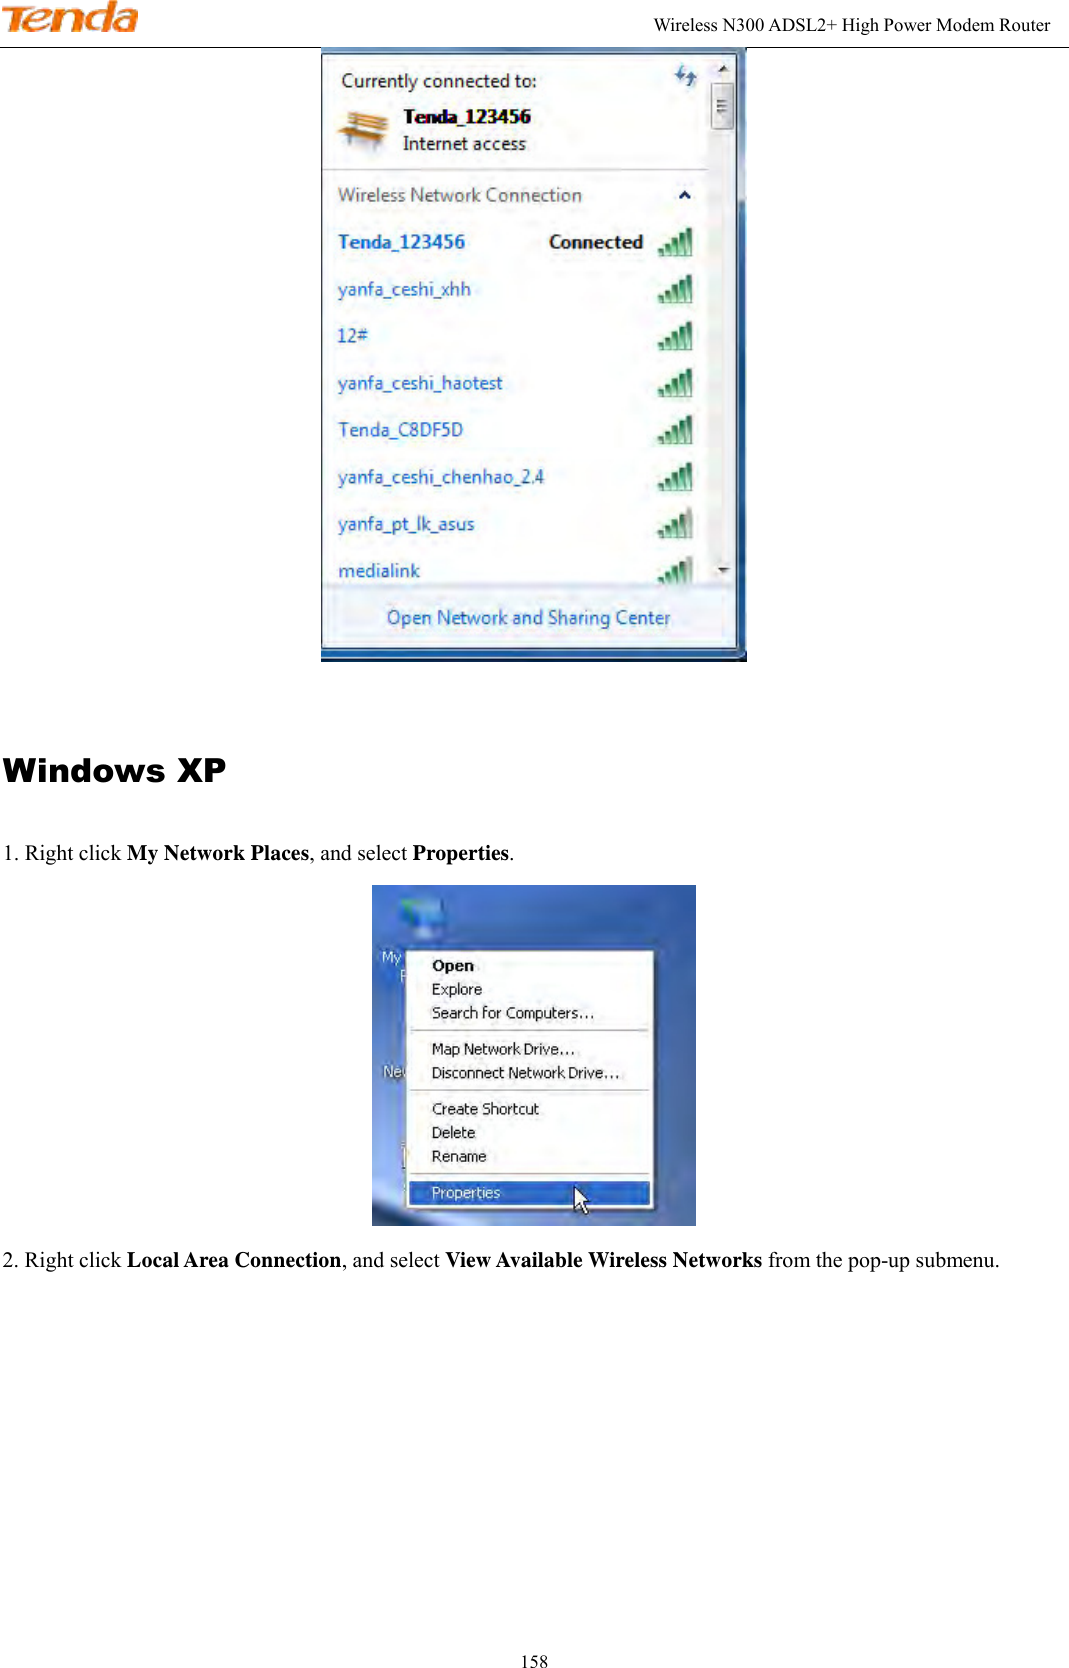                                                                                                               Wireless N300 ADSL2+ High Power Modem Router 158  Windows XP 1. Right click My Network Places, and select Properties.  2. Right click Local Area Connection, and select View Available Wireless Networks from the pop-up submenu. 